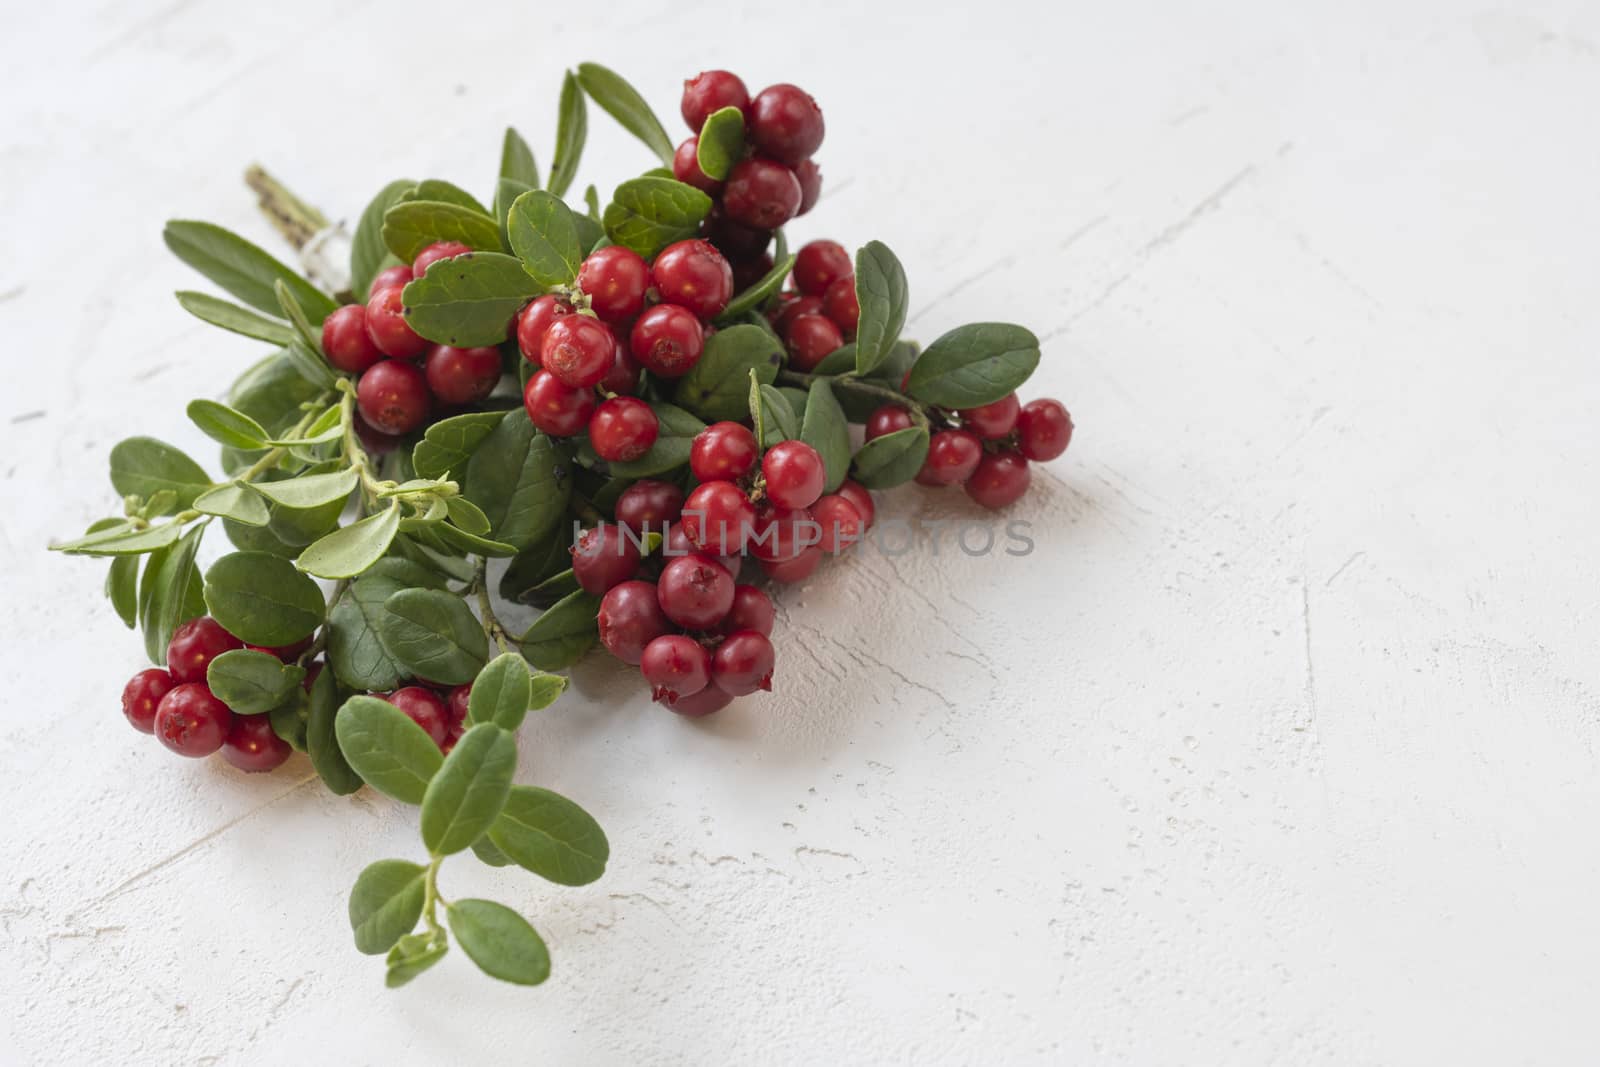 Cranberries and lingonberry. Set of wild northern berries. Clipping paths, shadows separated.